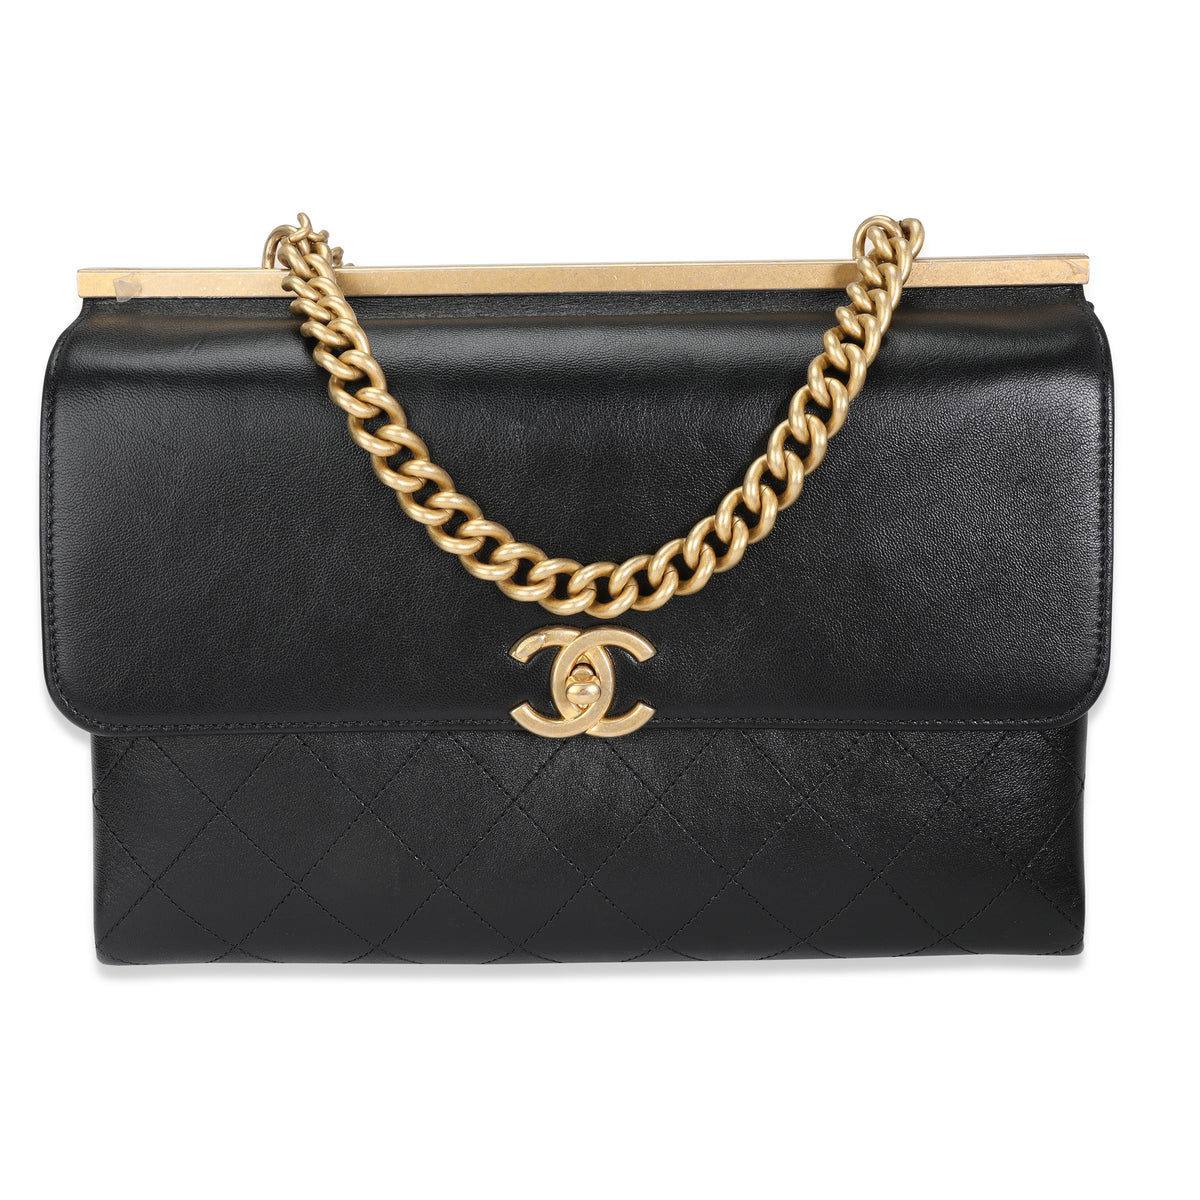 Chanel Black Quilted Calfskin Chain Handle Shopping Bag, myGemma